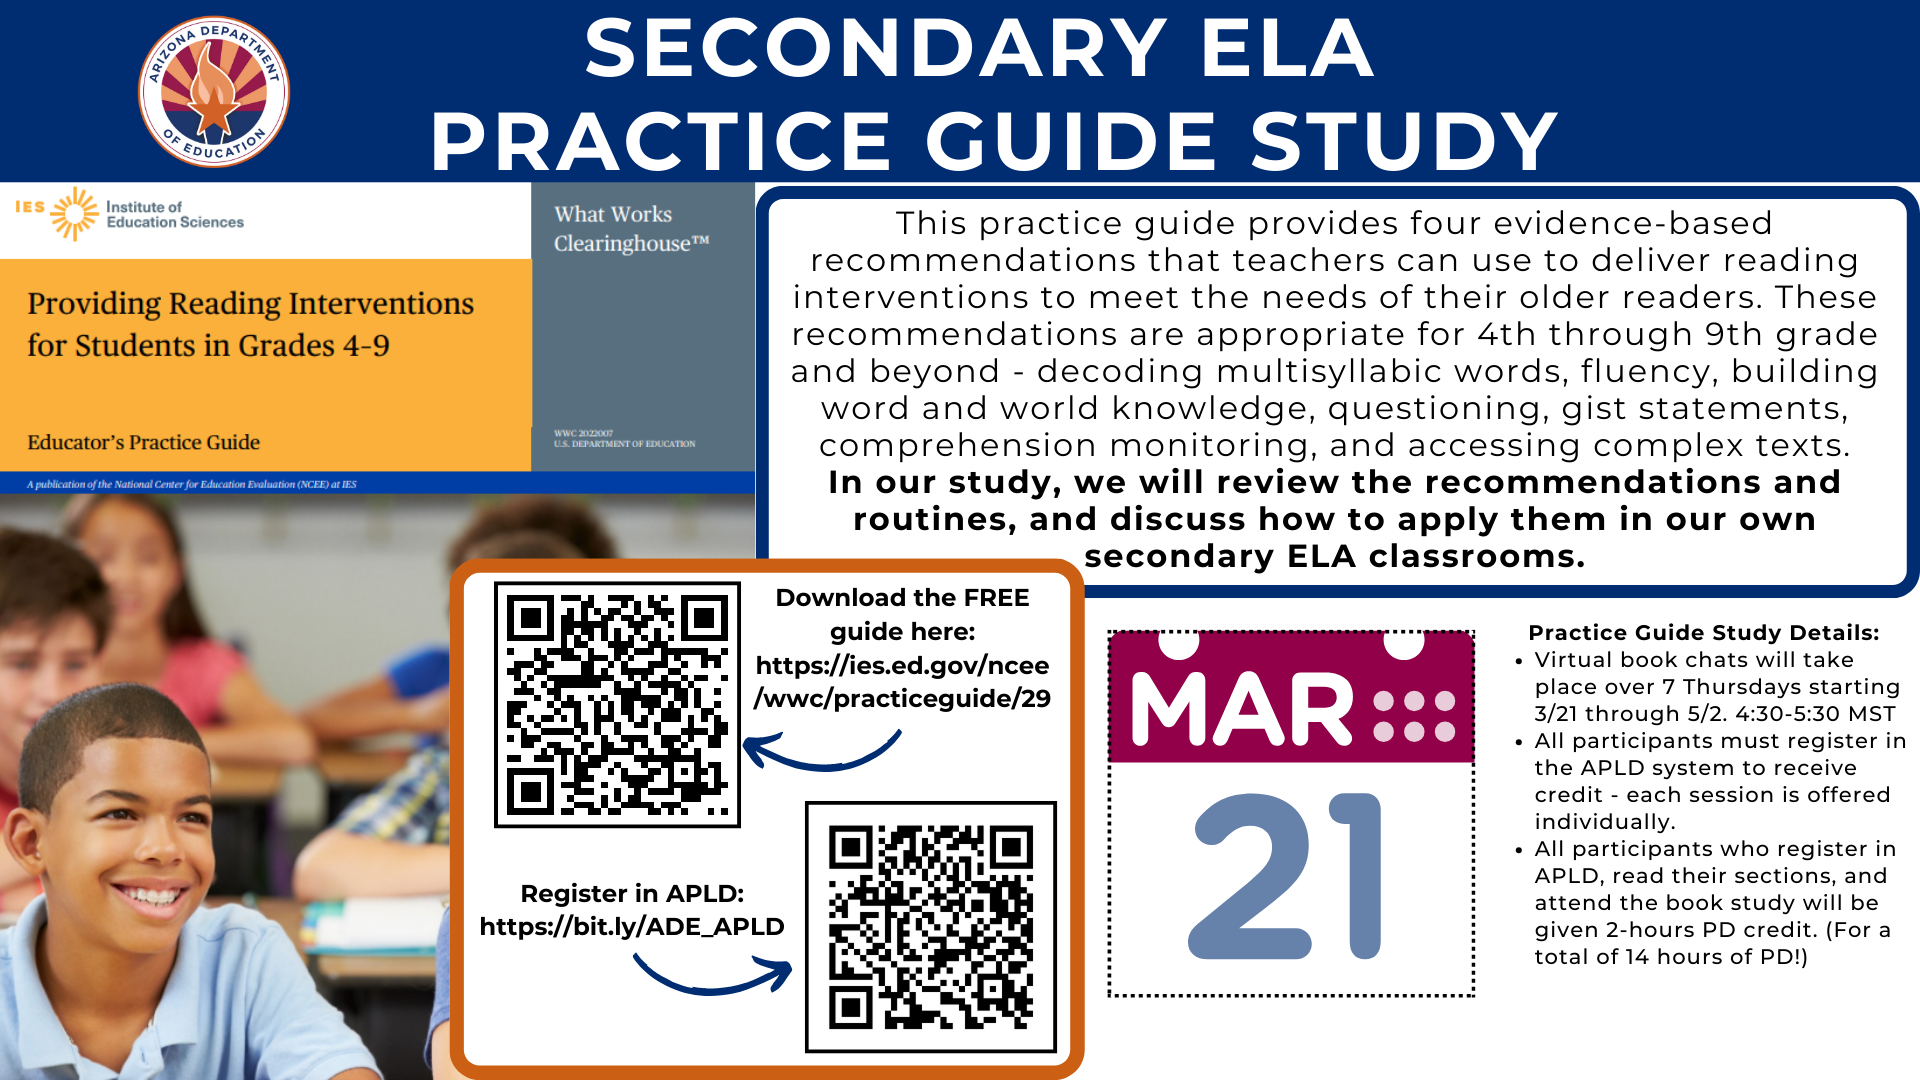 IES Guide Secondary Study